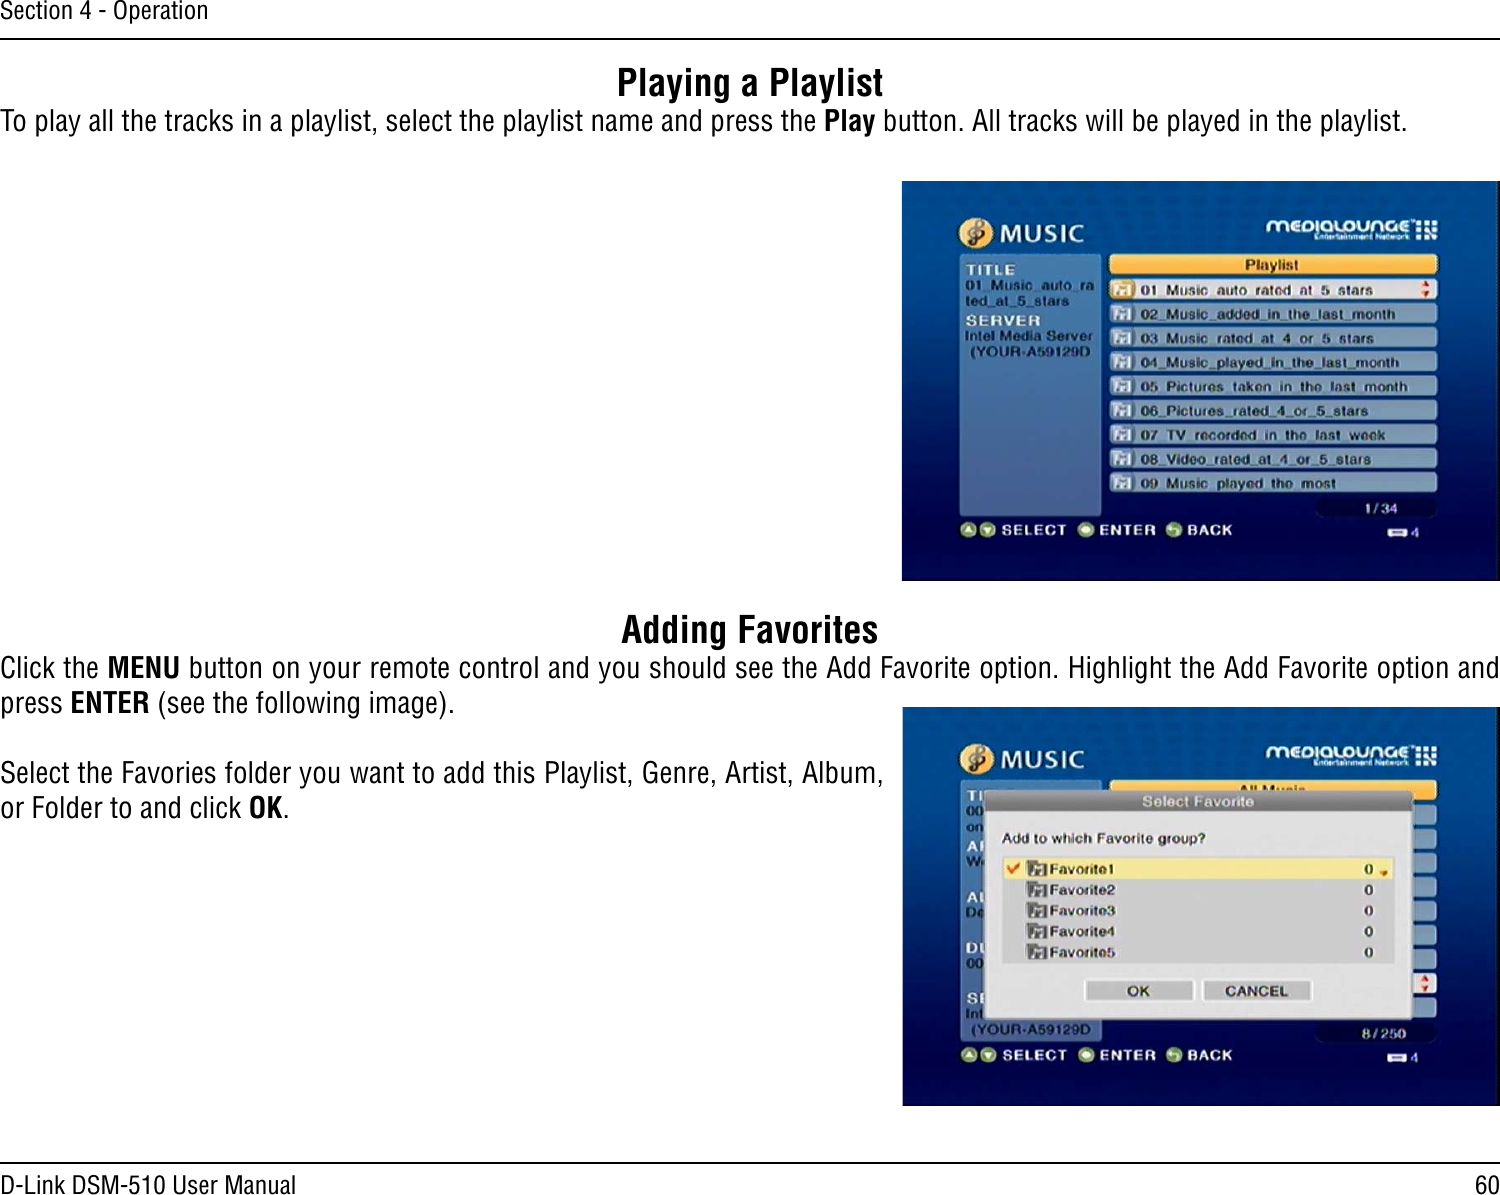 60D-Link DSM-510 User ManualSection 4 - OperationPlaying a PlaylistTo play all the tracks in a playlist, select the playlist name and press the Play button. All tracks will be played in the playlist.Adding FavoritesClick the MENU button on your remote control and you should see the Add Favorite option. Highlight the Add Favorite option and press ENTER (see the following image). Select the Favories folder you want to add this Playlist, Genre, Artist, Album, or Folder to and click OK.